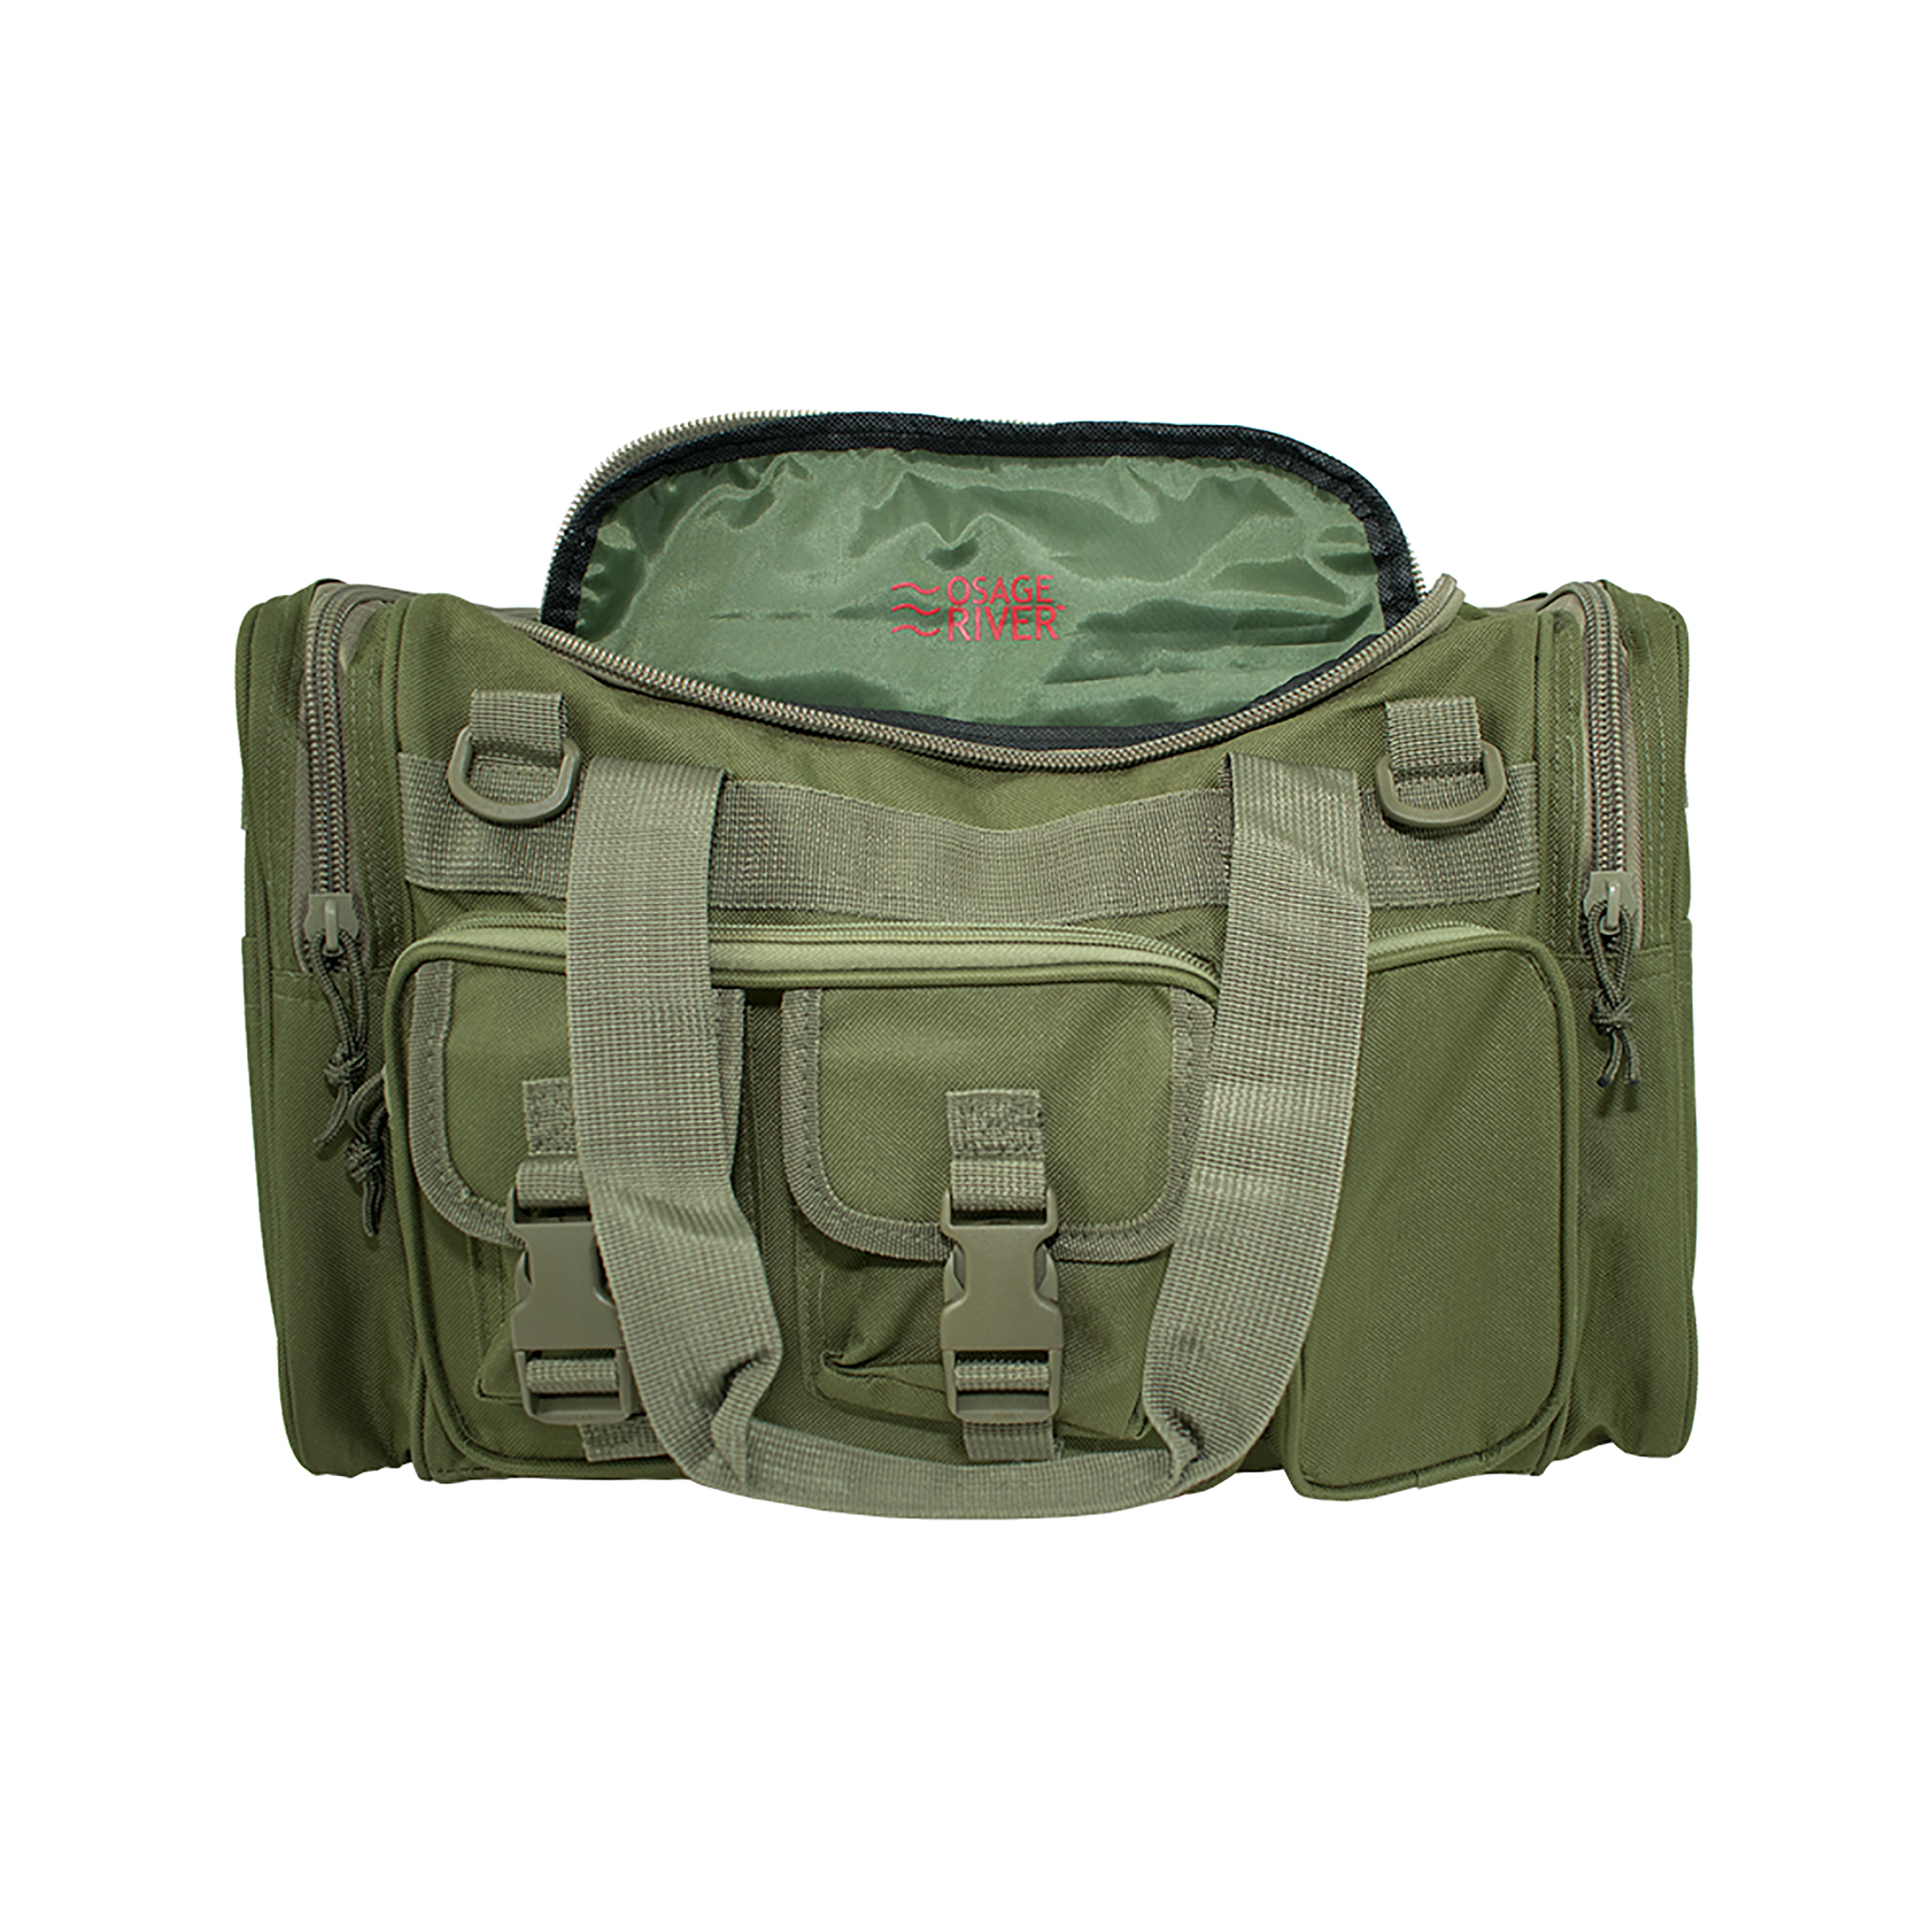 Osage River Tactical Duffle Bag with Shoulder Strap and Carry Handles | eBay